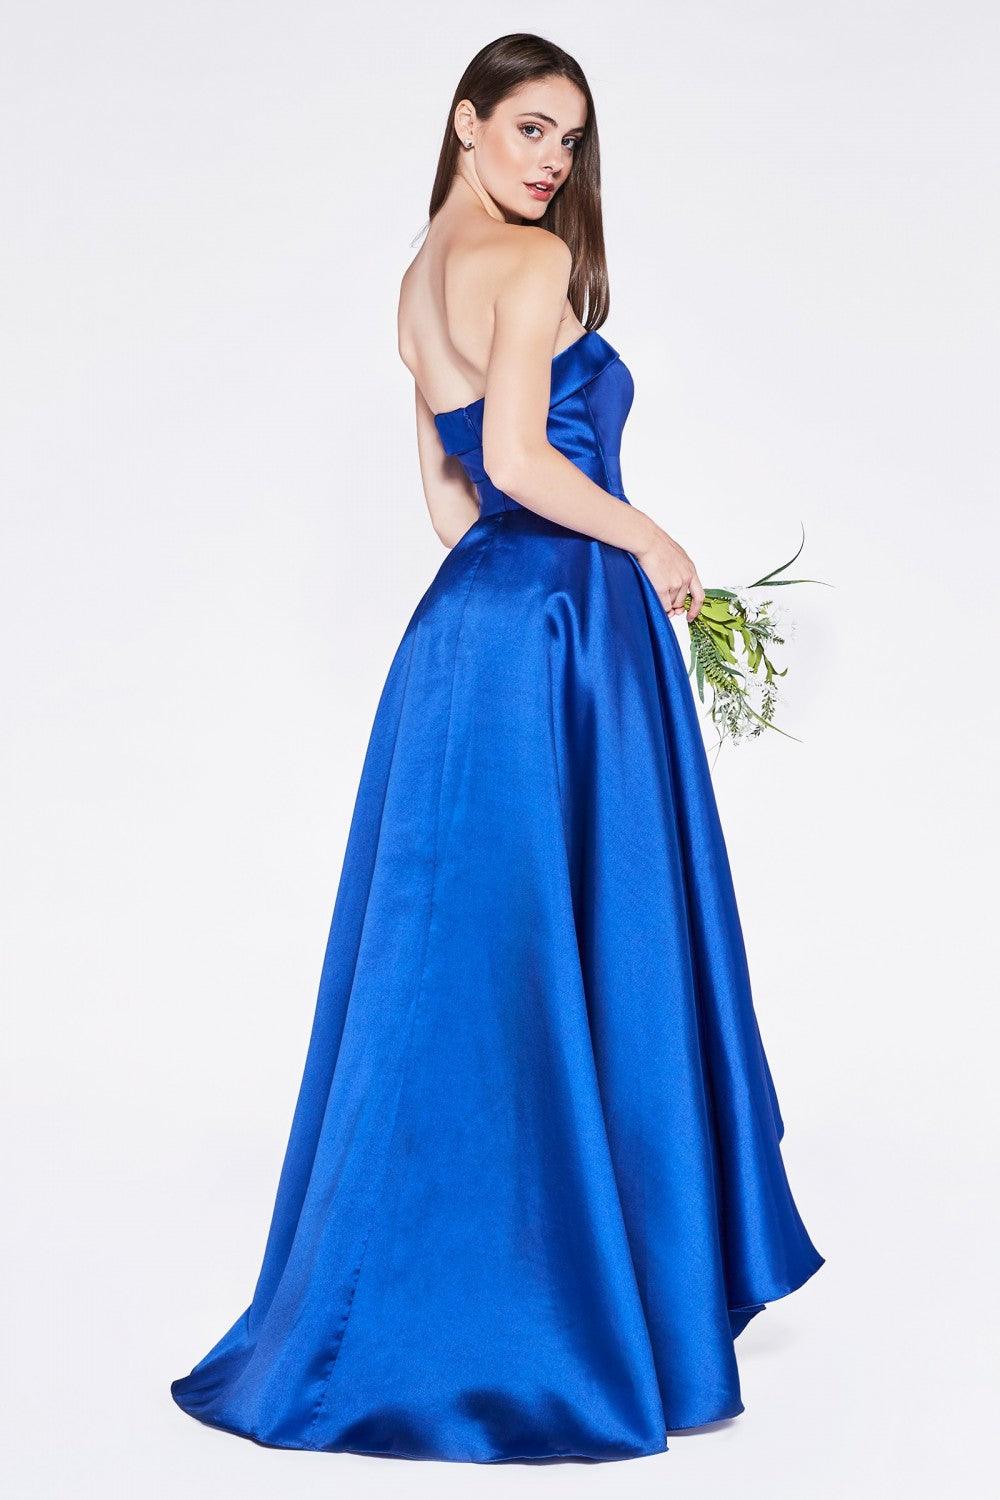 Strapless Long Prom Dress Evening Gown - The Dress Outlet Cinderella Divine